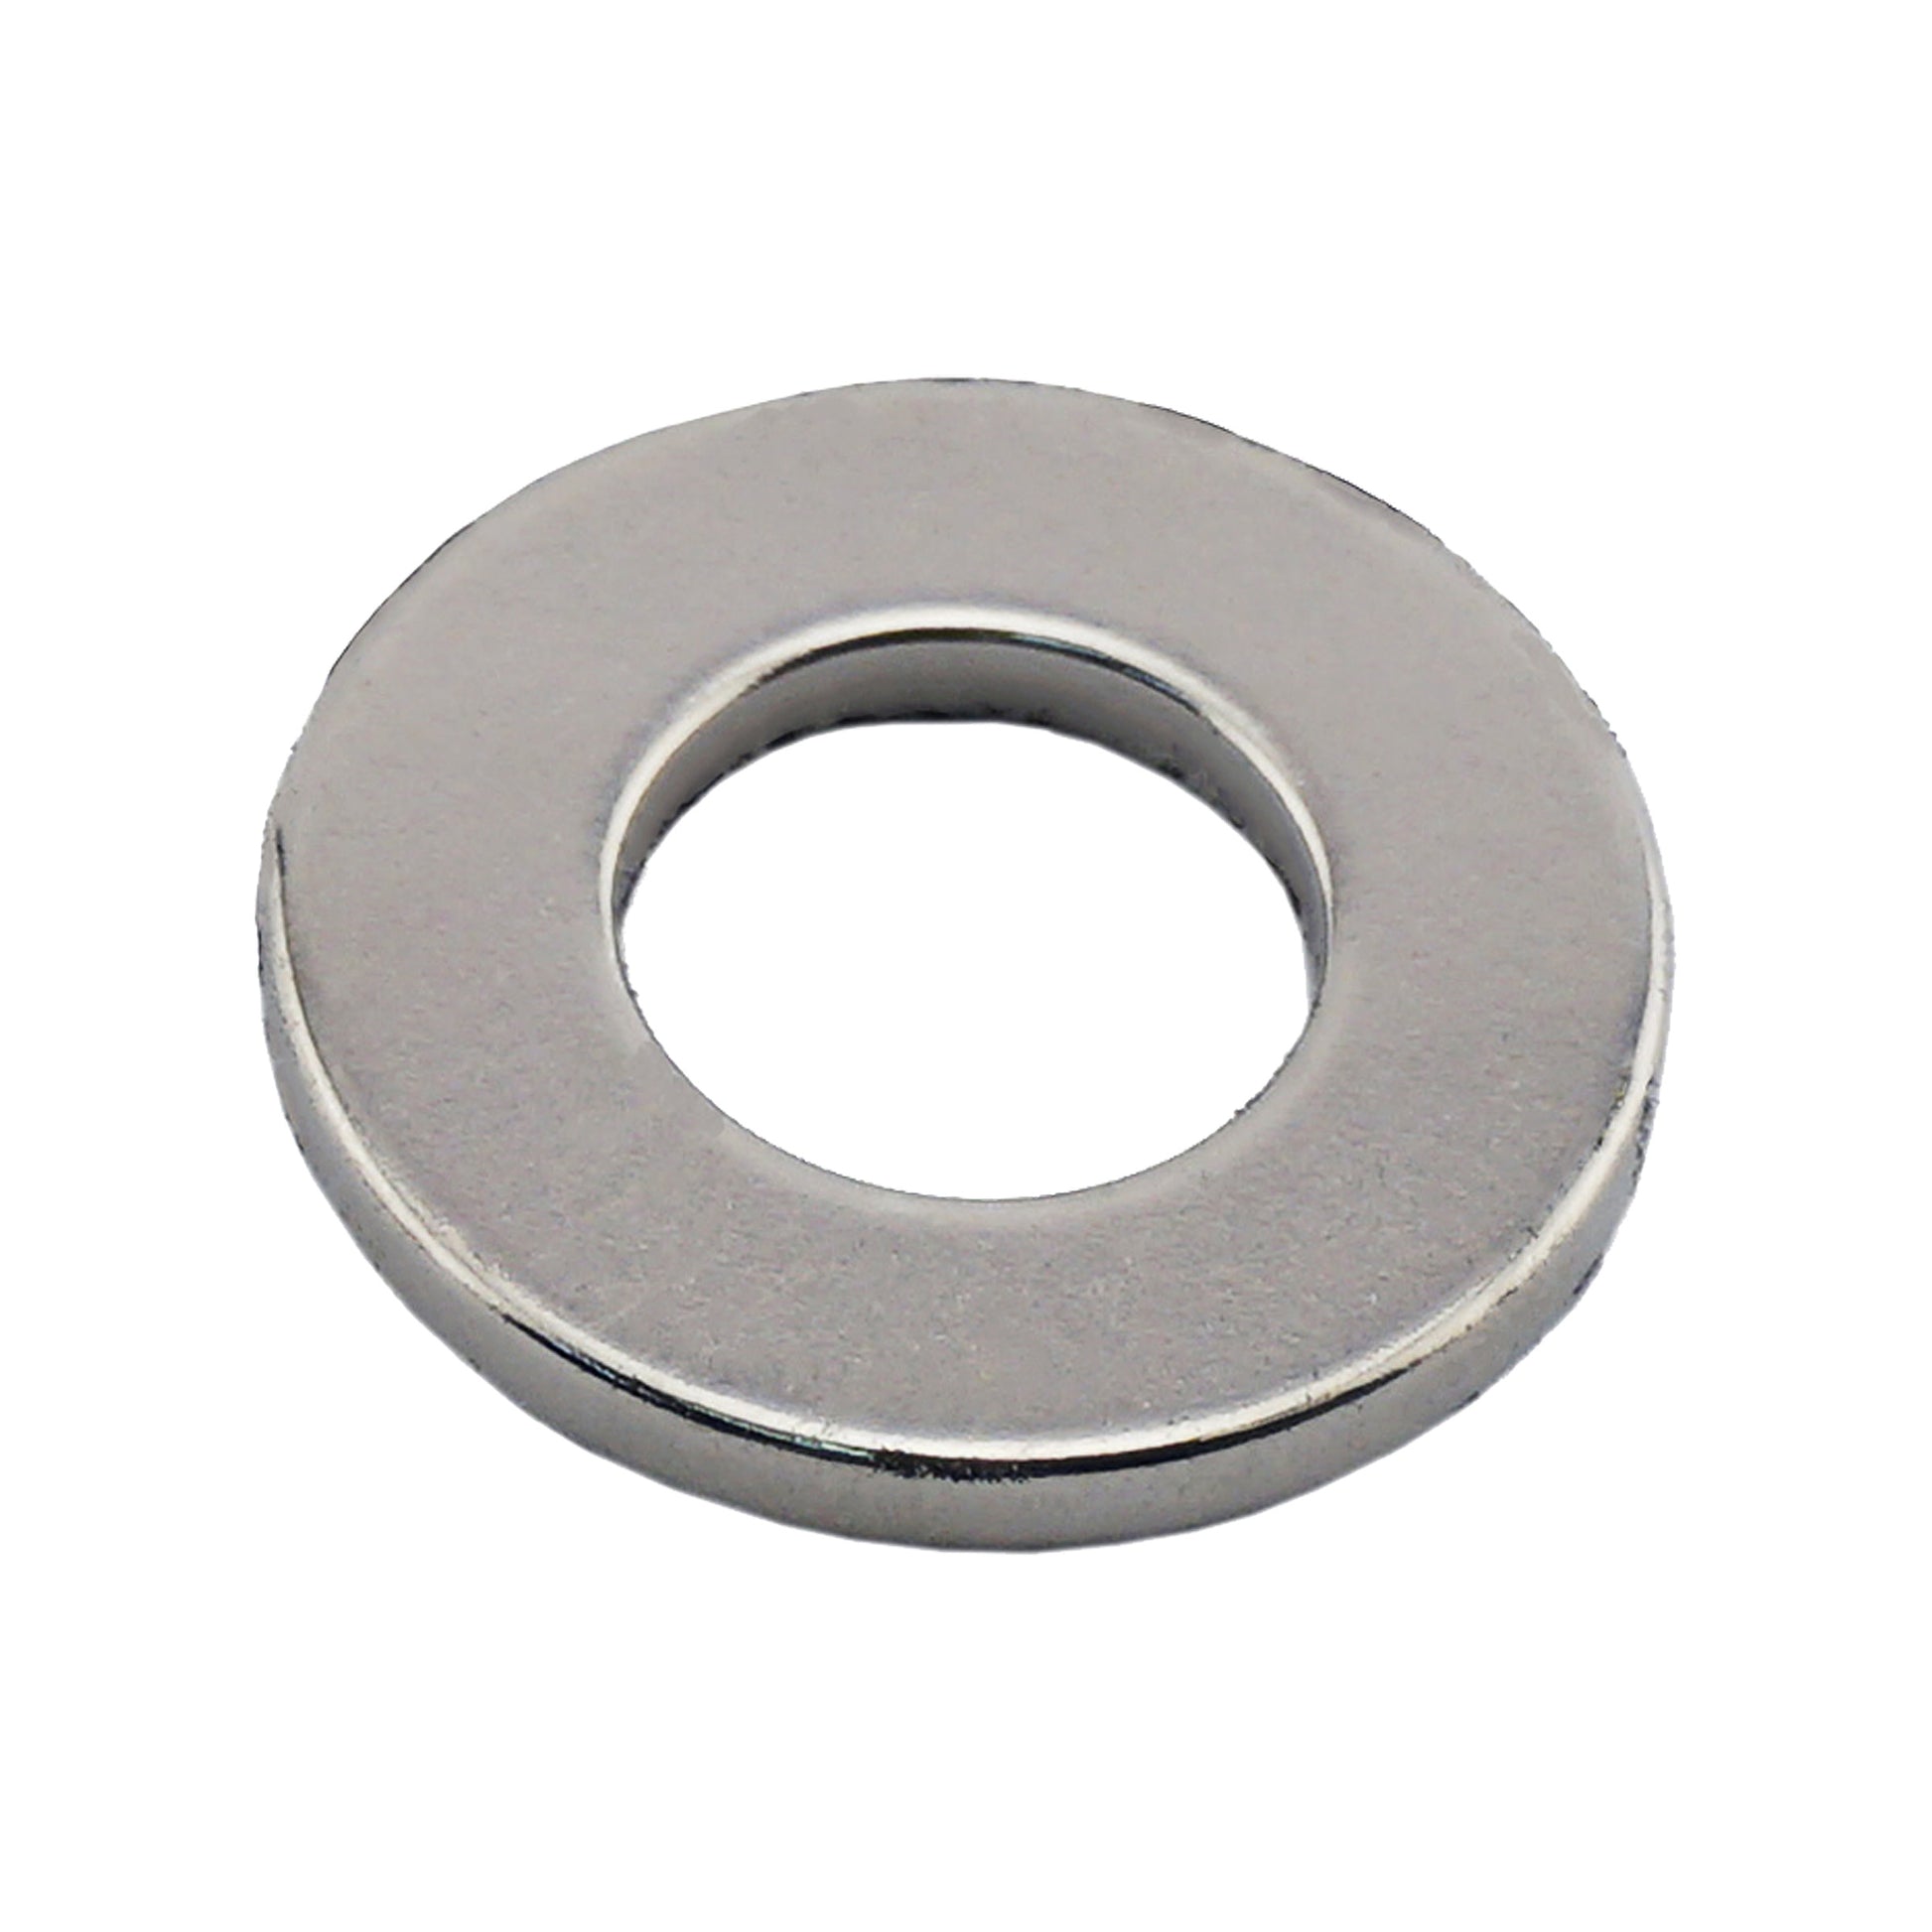 Load image into Gallery viewer, NR010013N Neodymium Ring Magnet - Front View